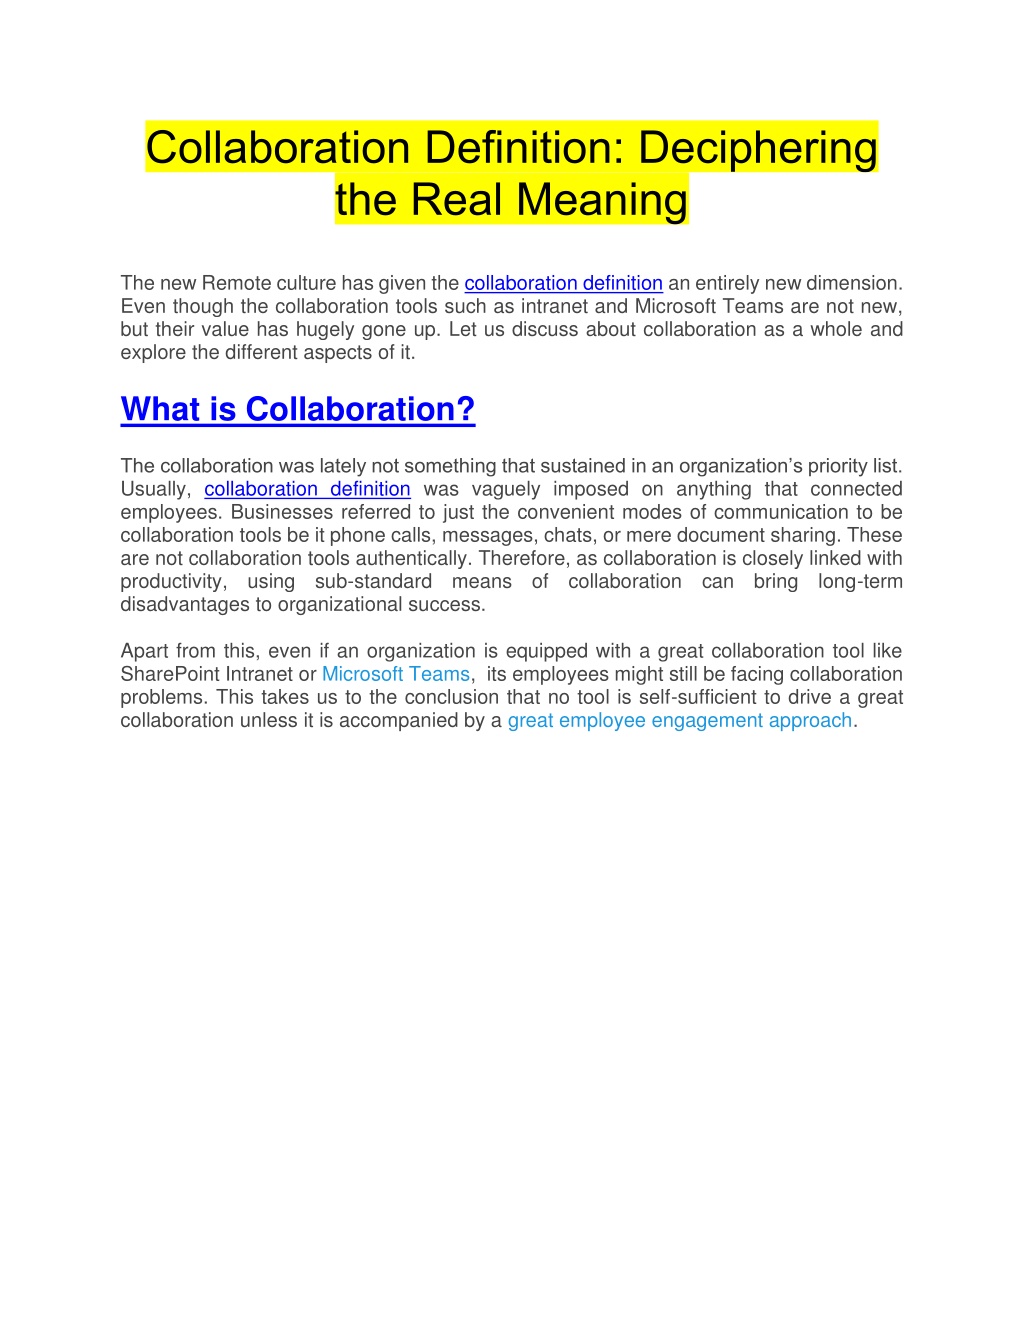 PPT - Collaboration Definition : Deciphering the Real Meaning ...